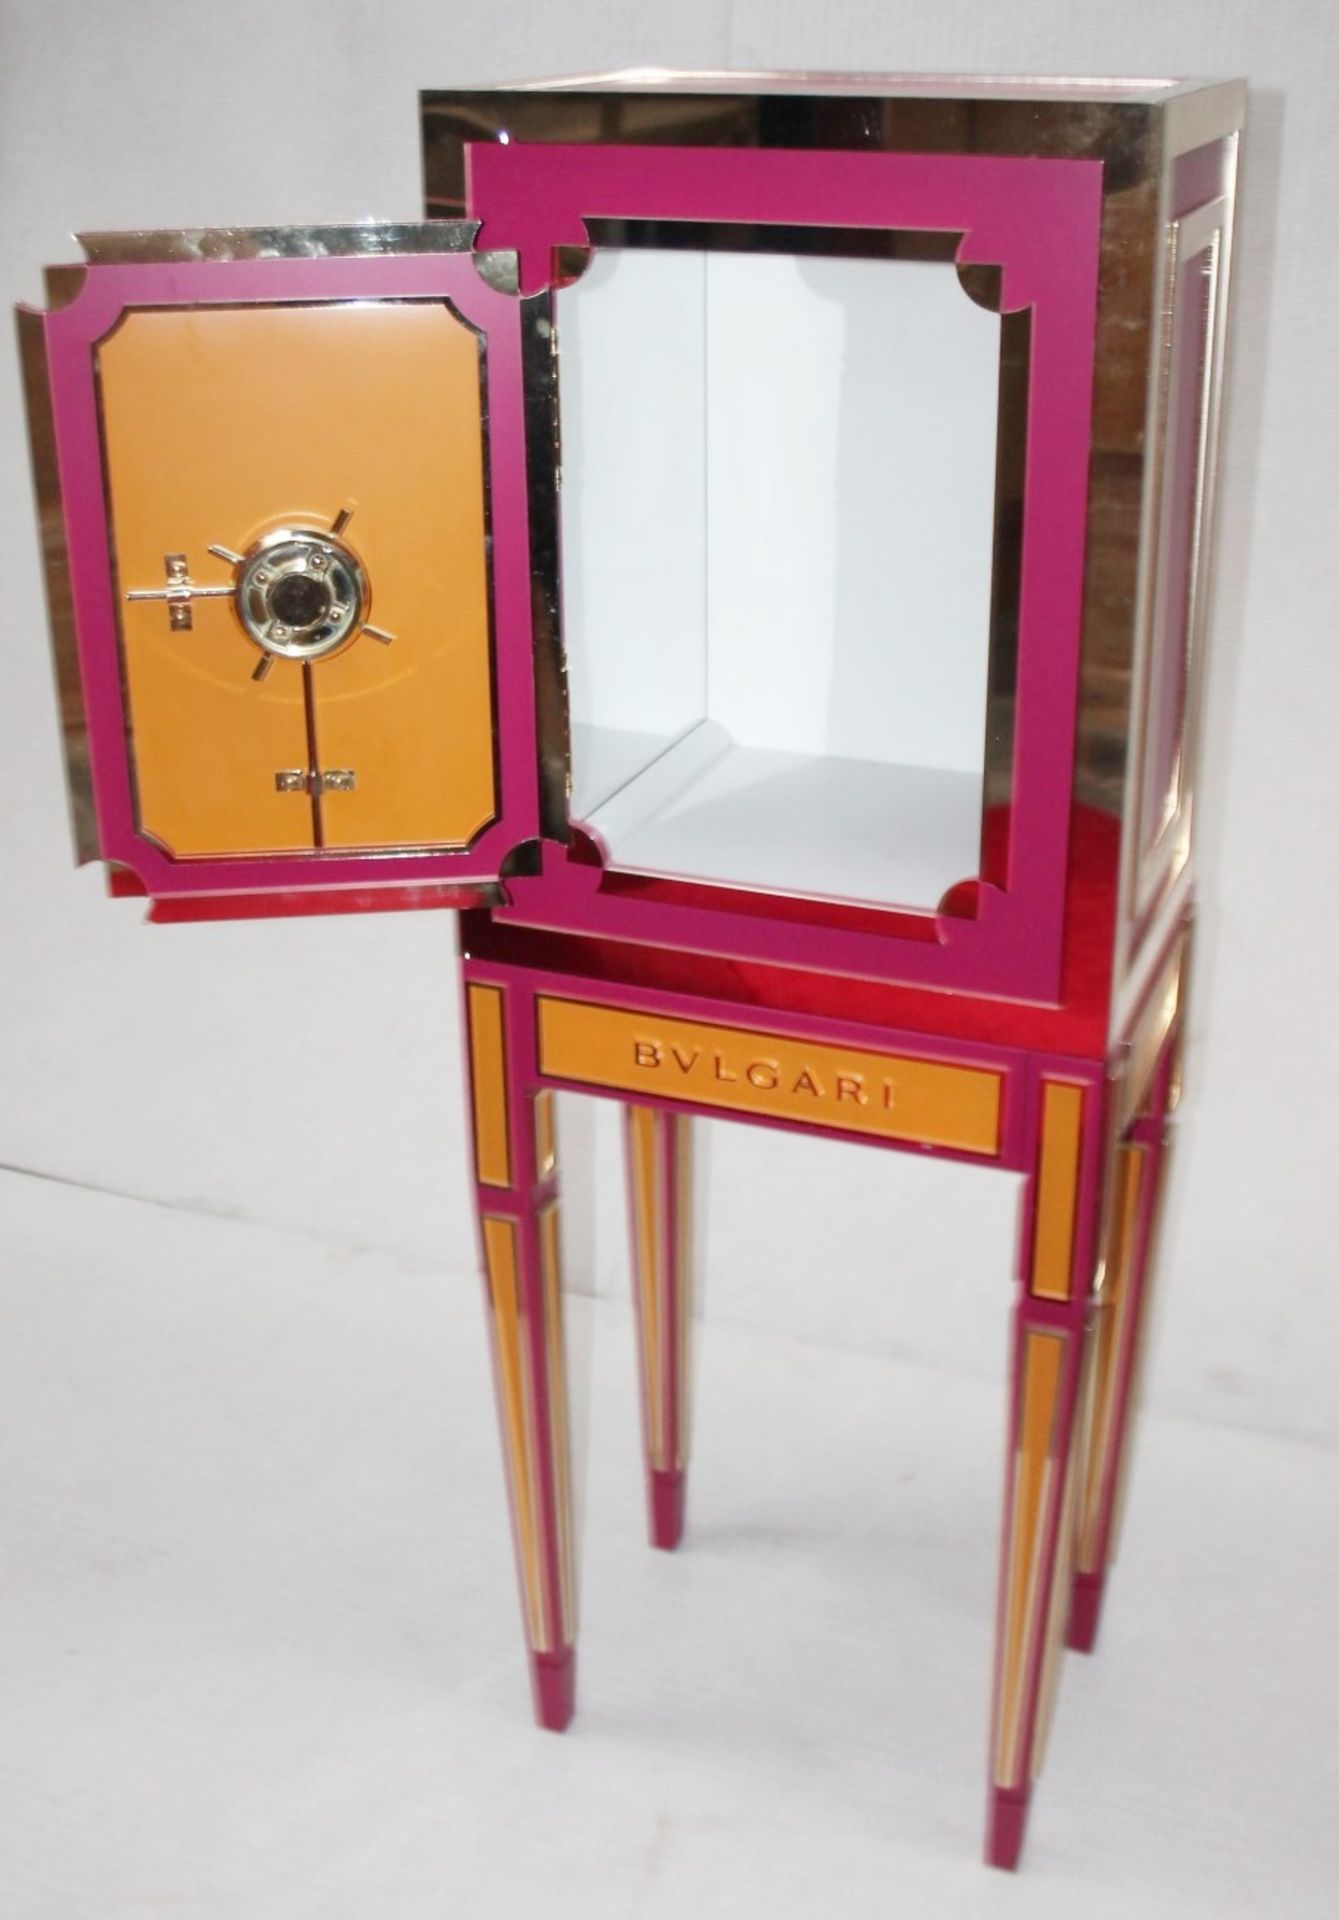 2 x Specially Commissioned Bank Vault Safe-style Illuminated Shop Display Dummy Props - Image 5 of 17